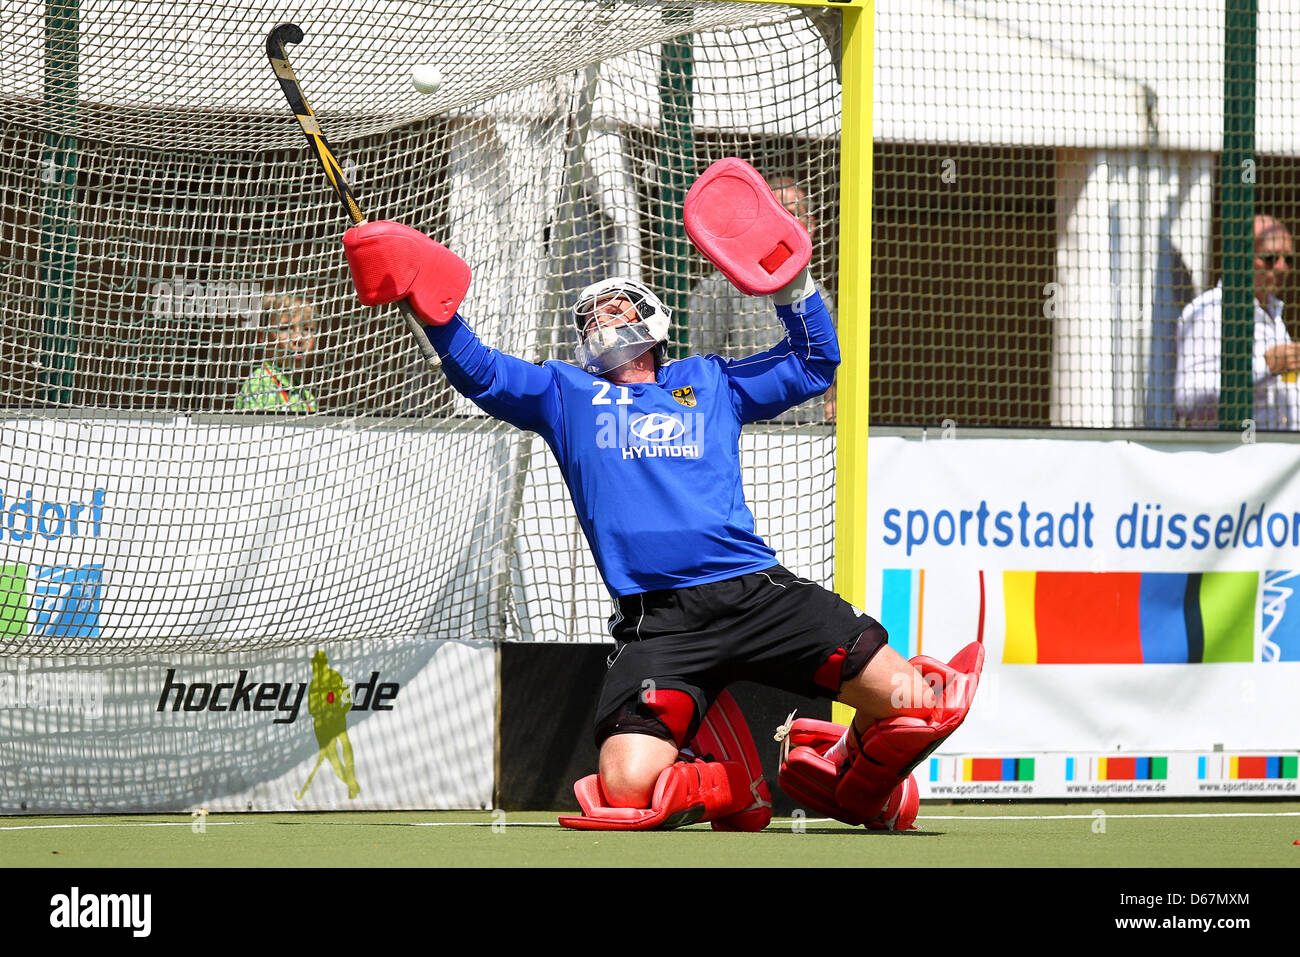 Germany's Max Weinhold is pictured during a field hockey national match between Germany and Belgium at DSD in Duesseldorf, Germany, 23 June 2012. Photo: Revierfoto Stock Photo